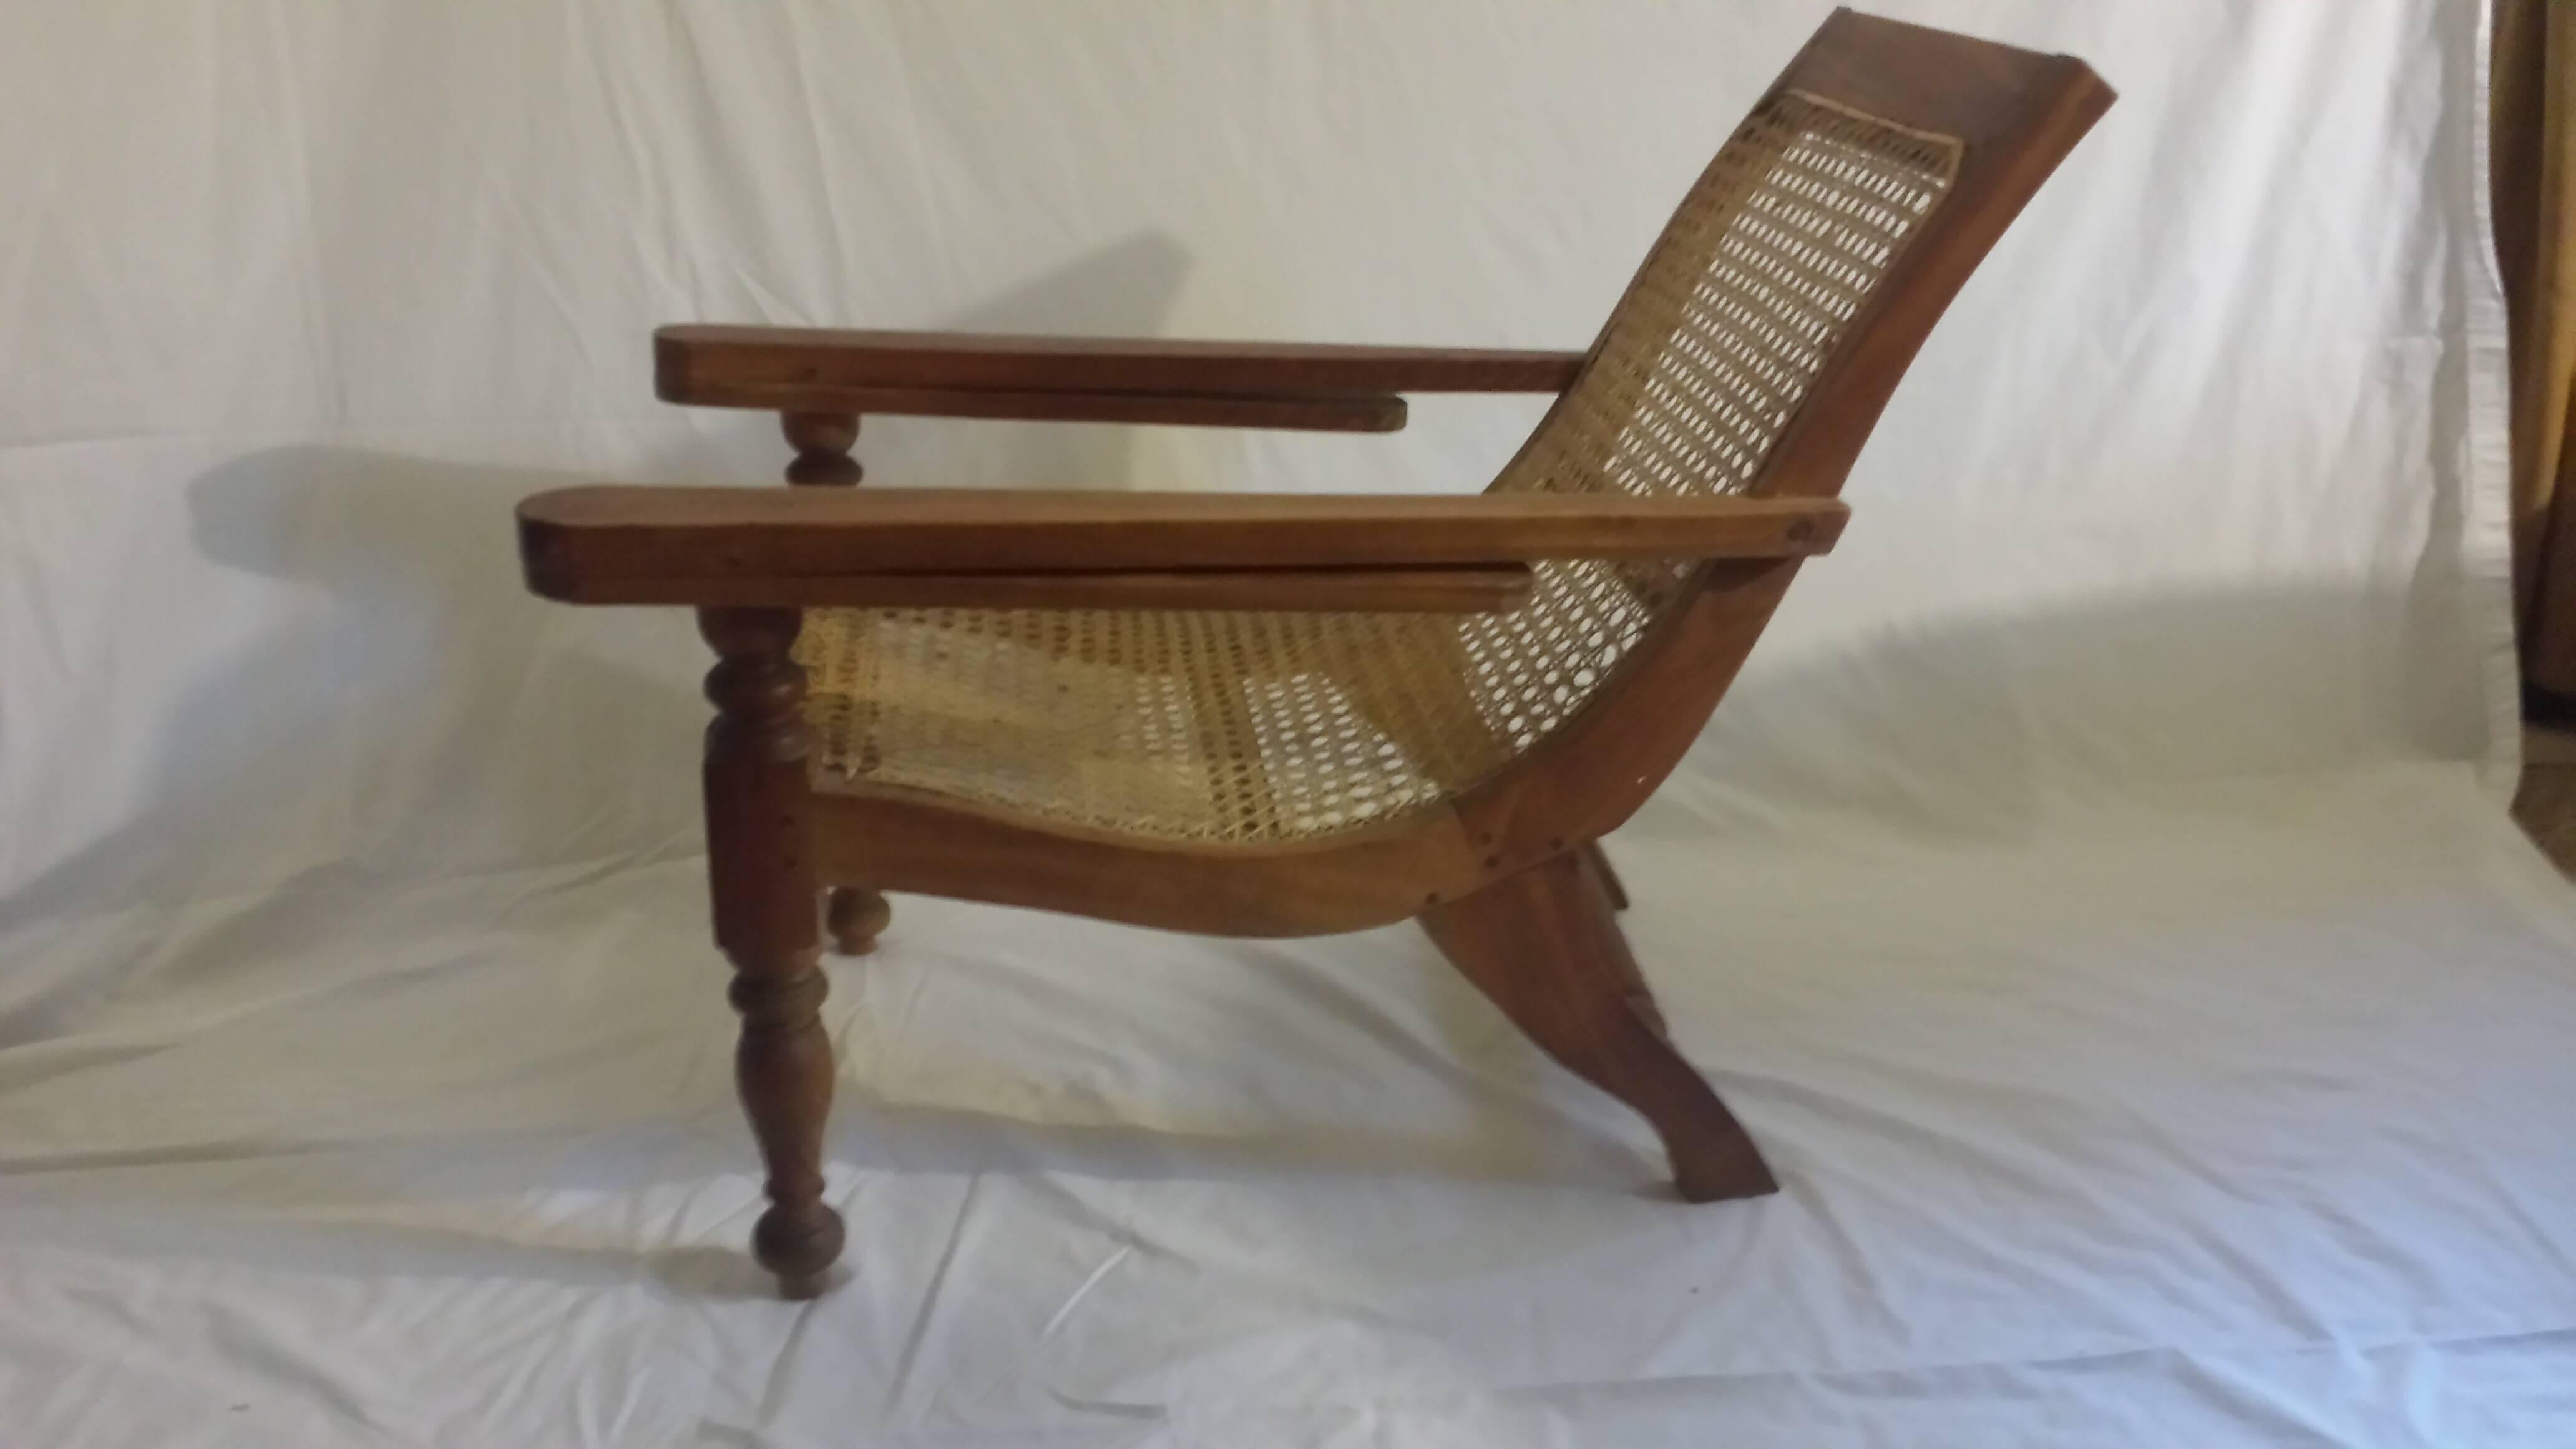 A rare British Colonial, Ceylonese, child's plantation or planters chair in solid satinwood, handmade pegged construction, hand canning and footrest extensions (40 inches when extended).